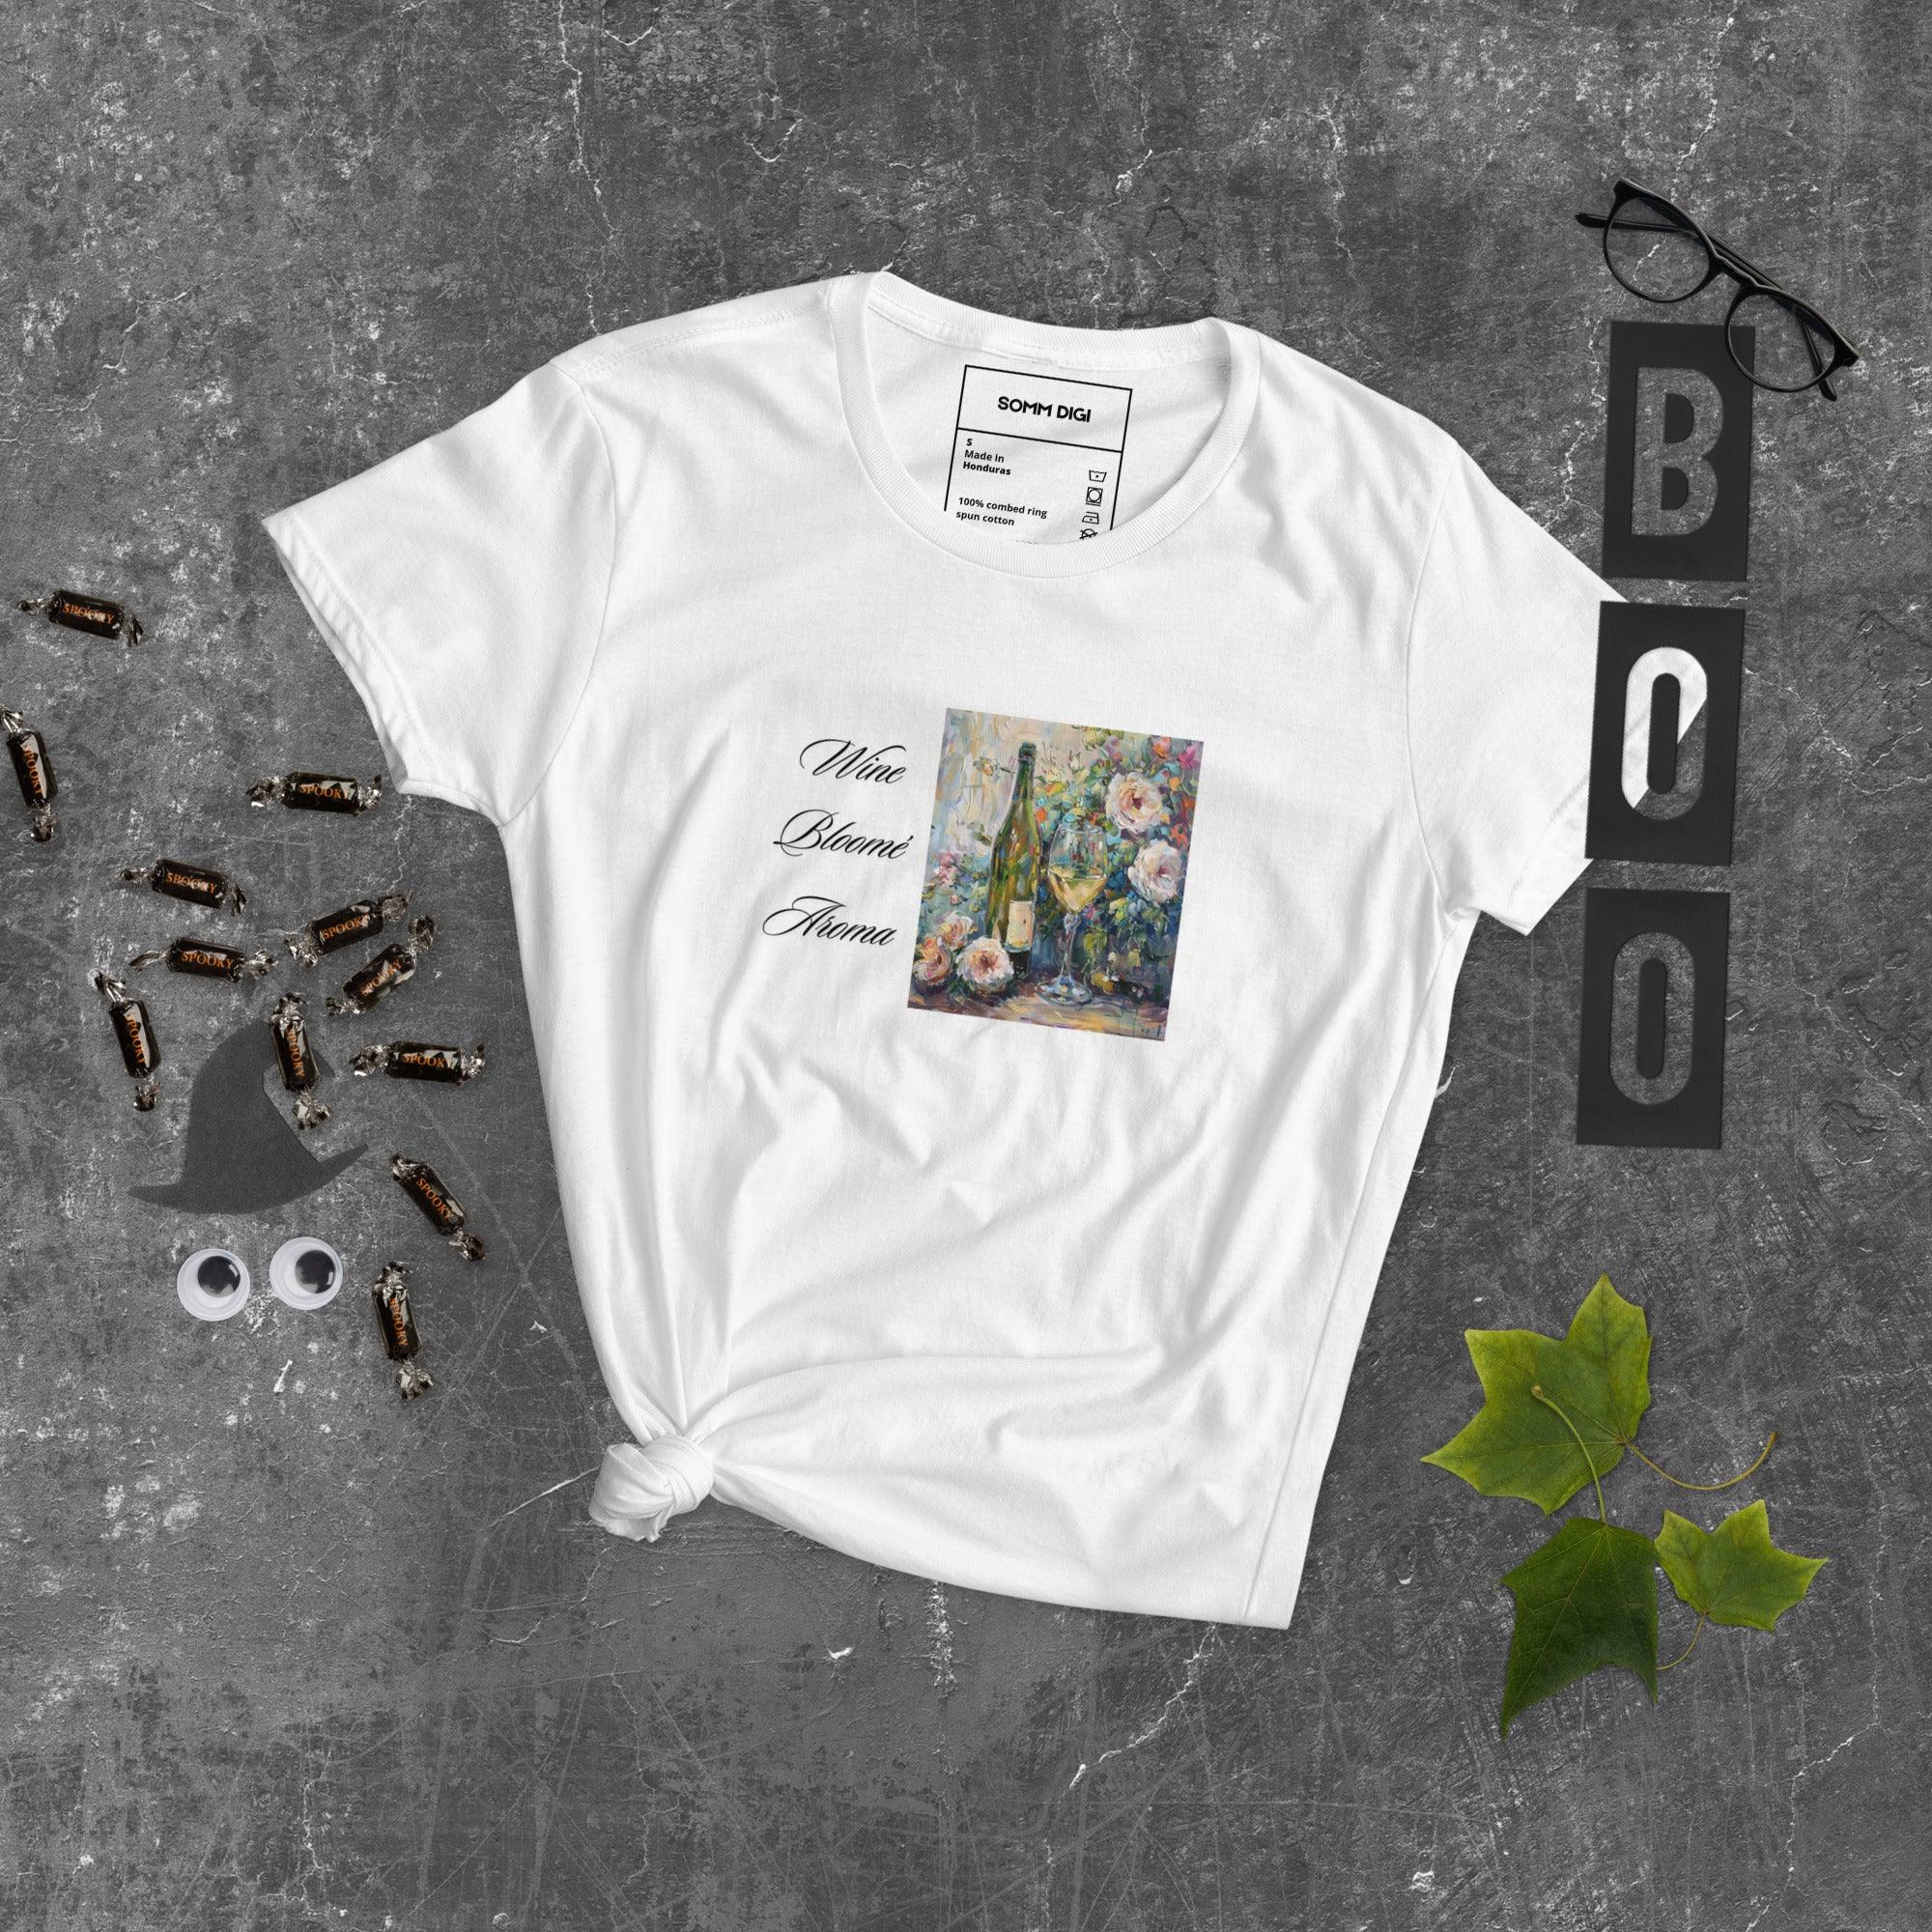 "Blossom & Aroma: The Essential Winery Shirt for the Sophisticated Palate - SOMM DIGI